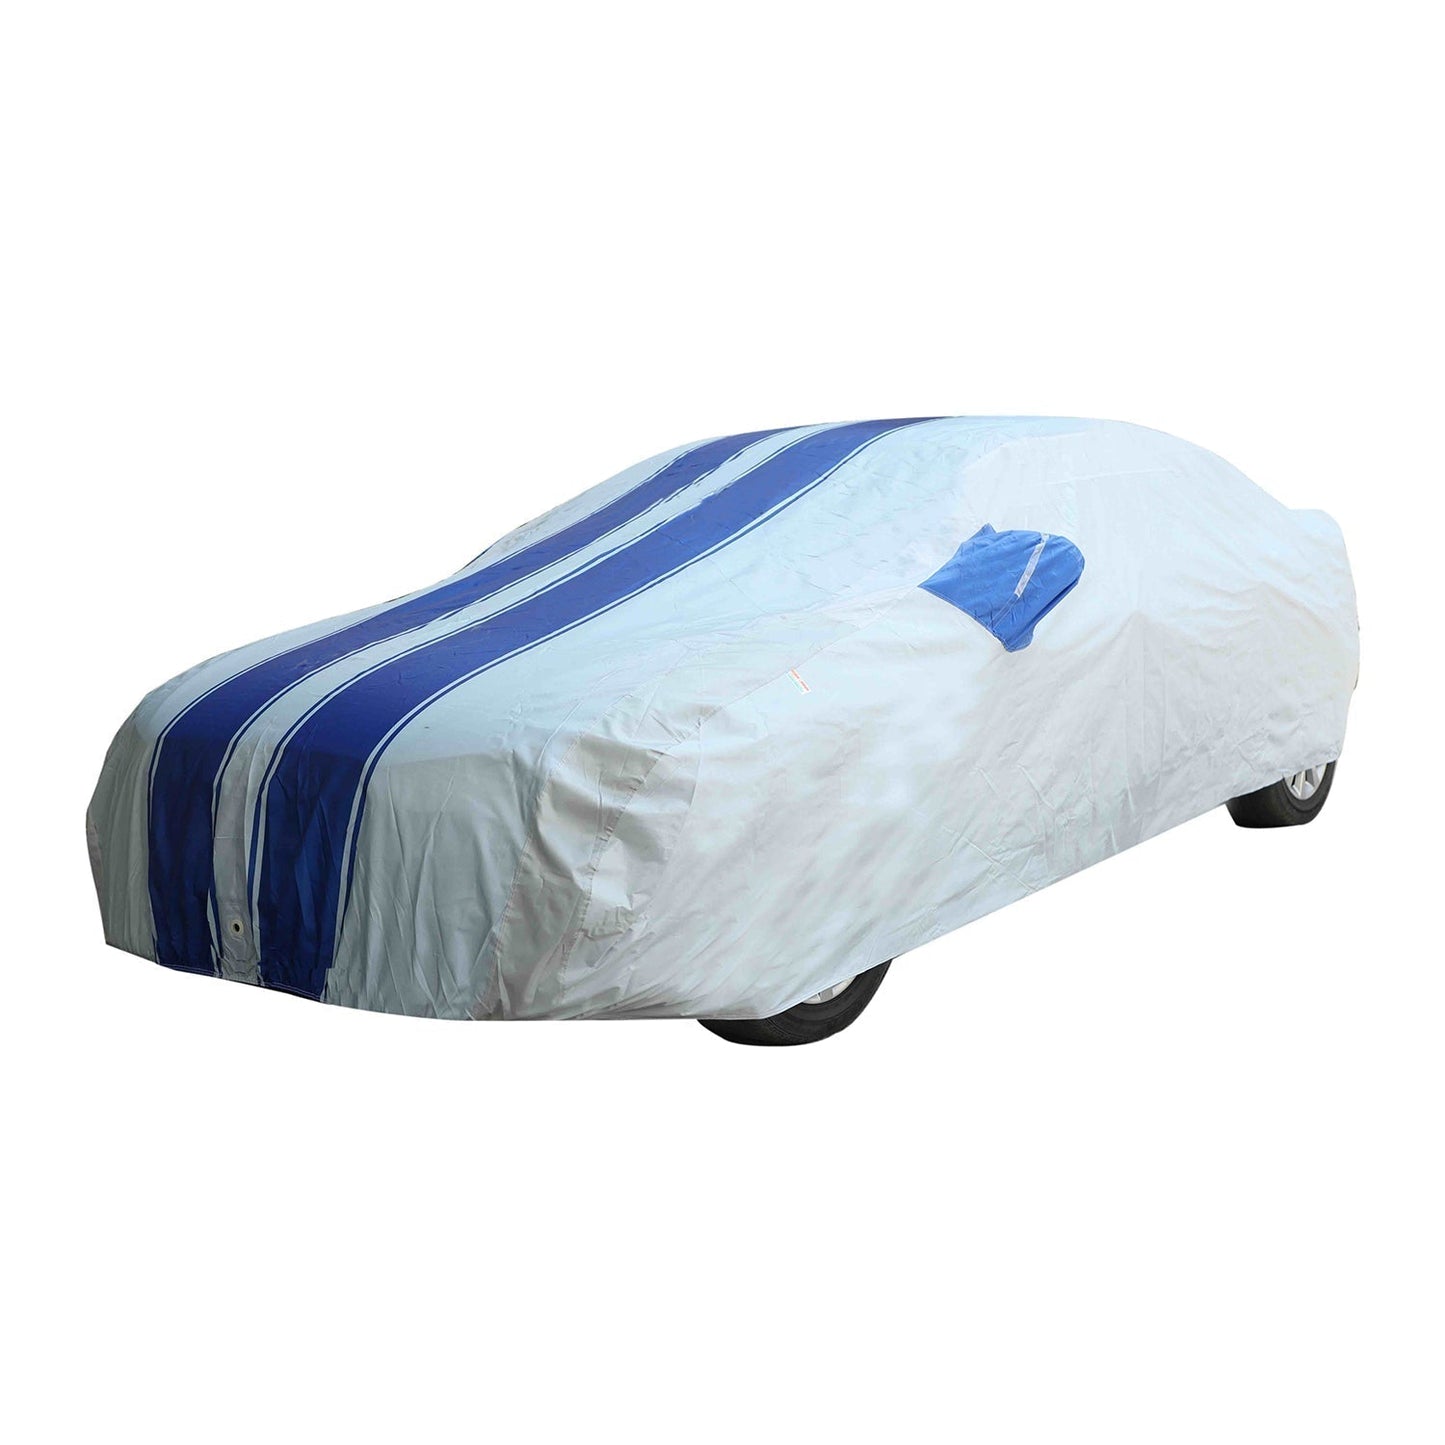 Oshotto 100% Blue dustproof and Water Resistant Car Body Cover with Mirror Pockets For Honda Amaze Old (2013-2017)